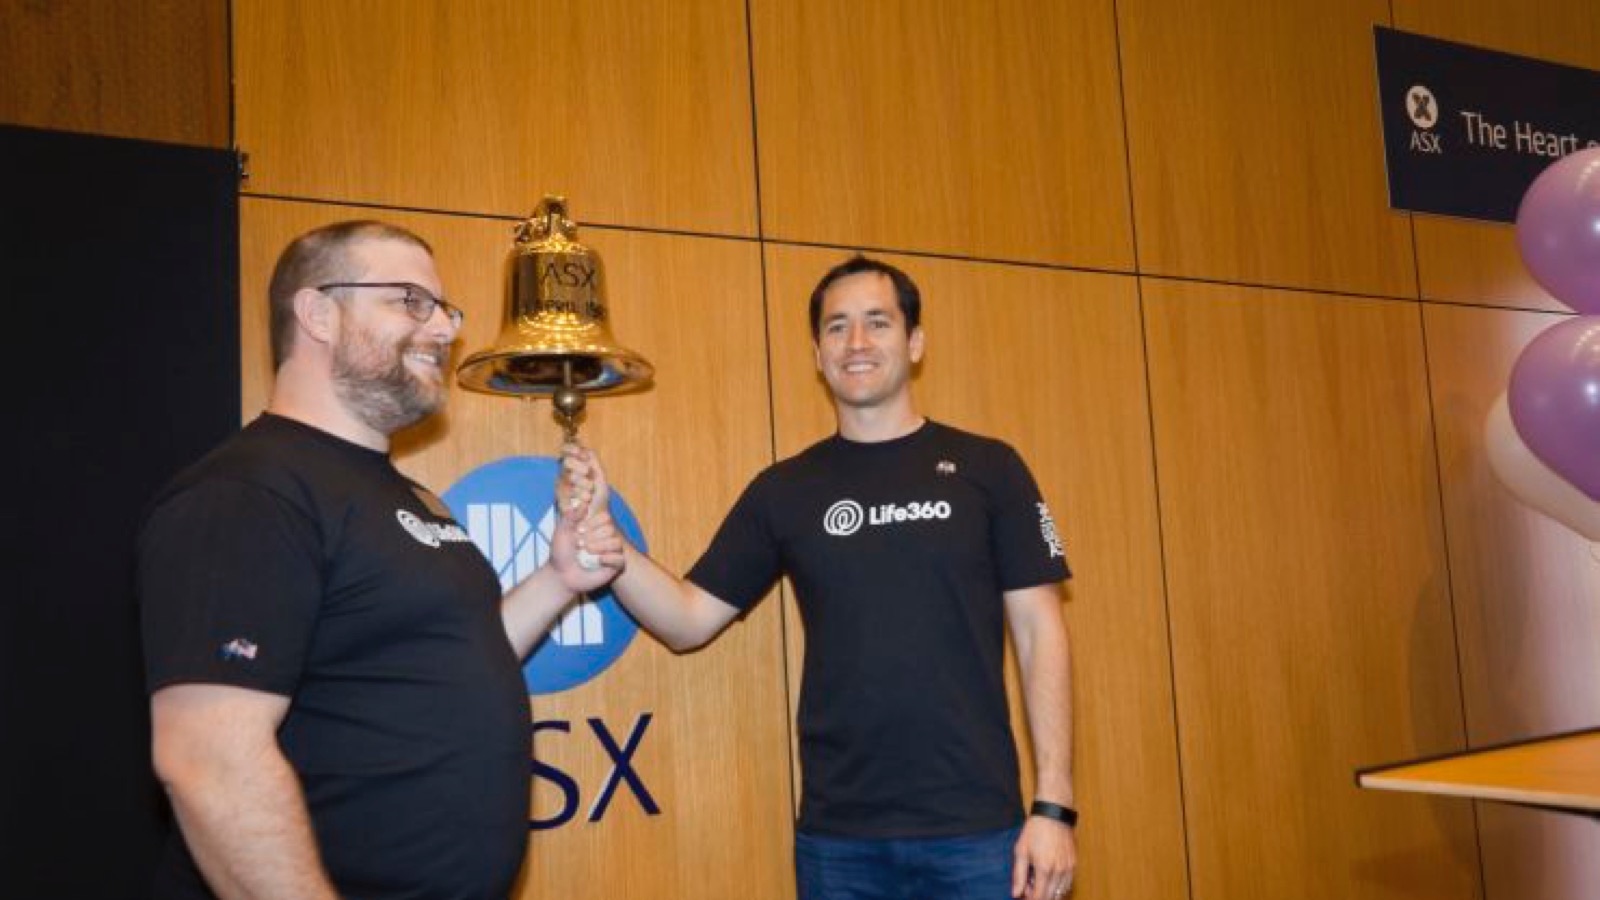 Life360 ringing the bell at the Australian Securities Exchange